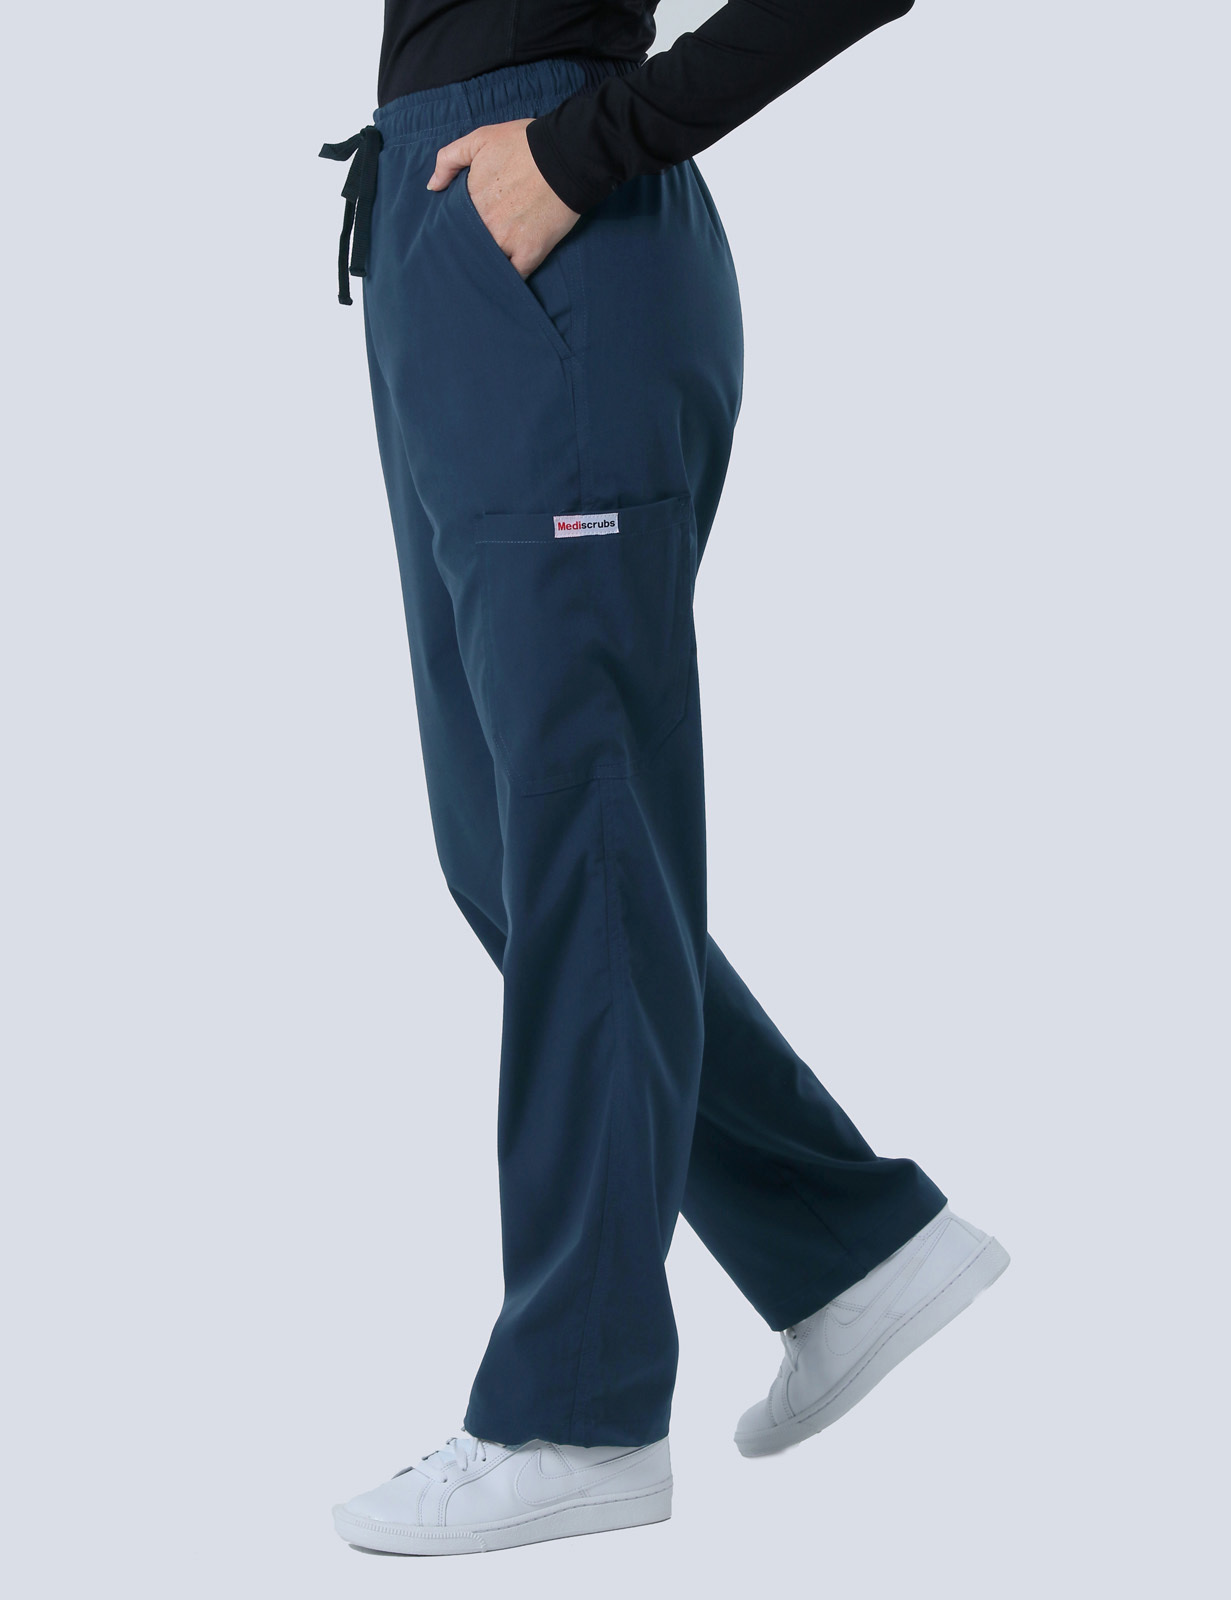 RBWH - Grantley Stable Neonatal Unit (4 Pocket Scrub Top and Cargo Pants in Navy incl Logos)